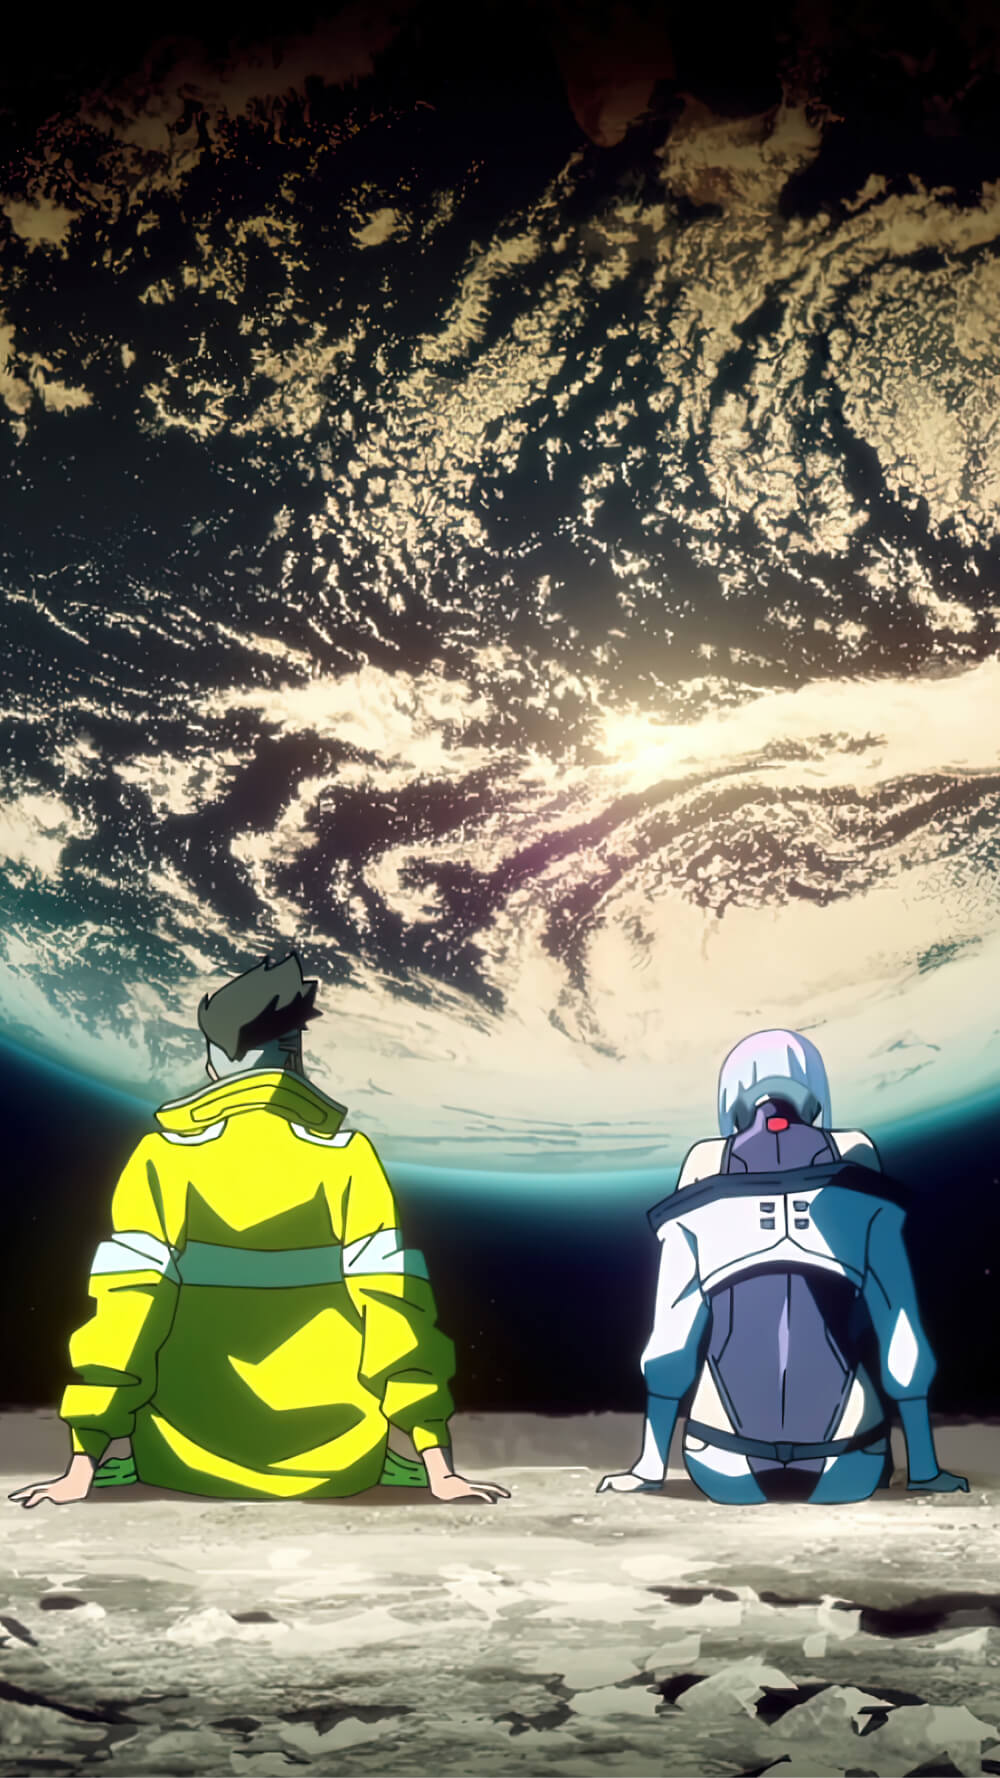 David and Lucy sitting on the moon together in the anime Cyberpunk edgerunner